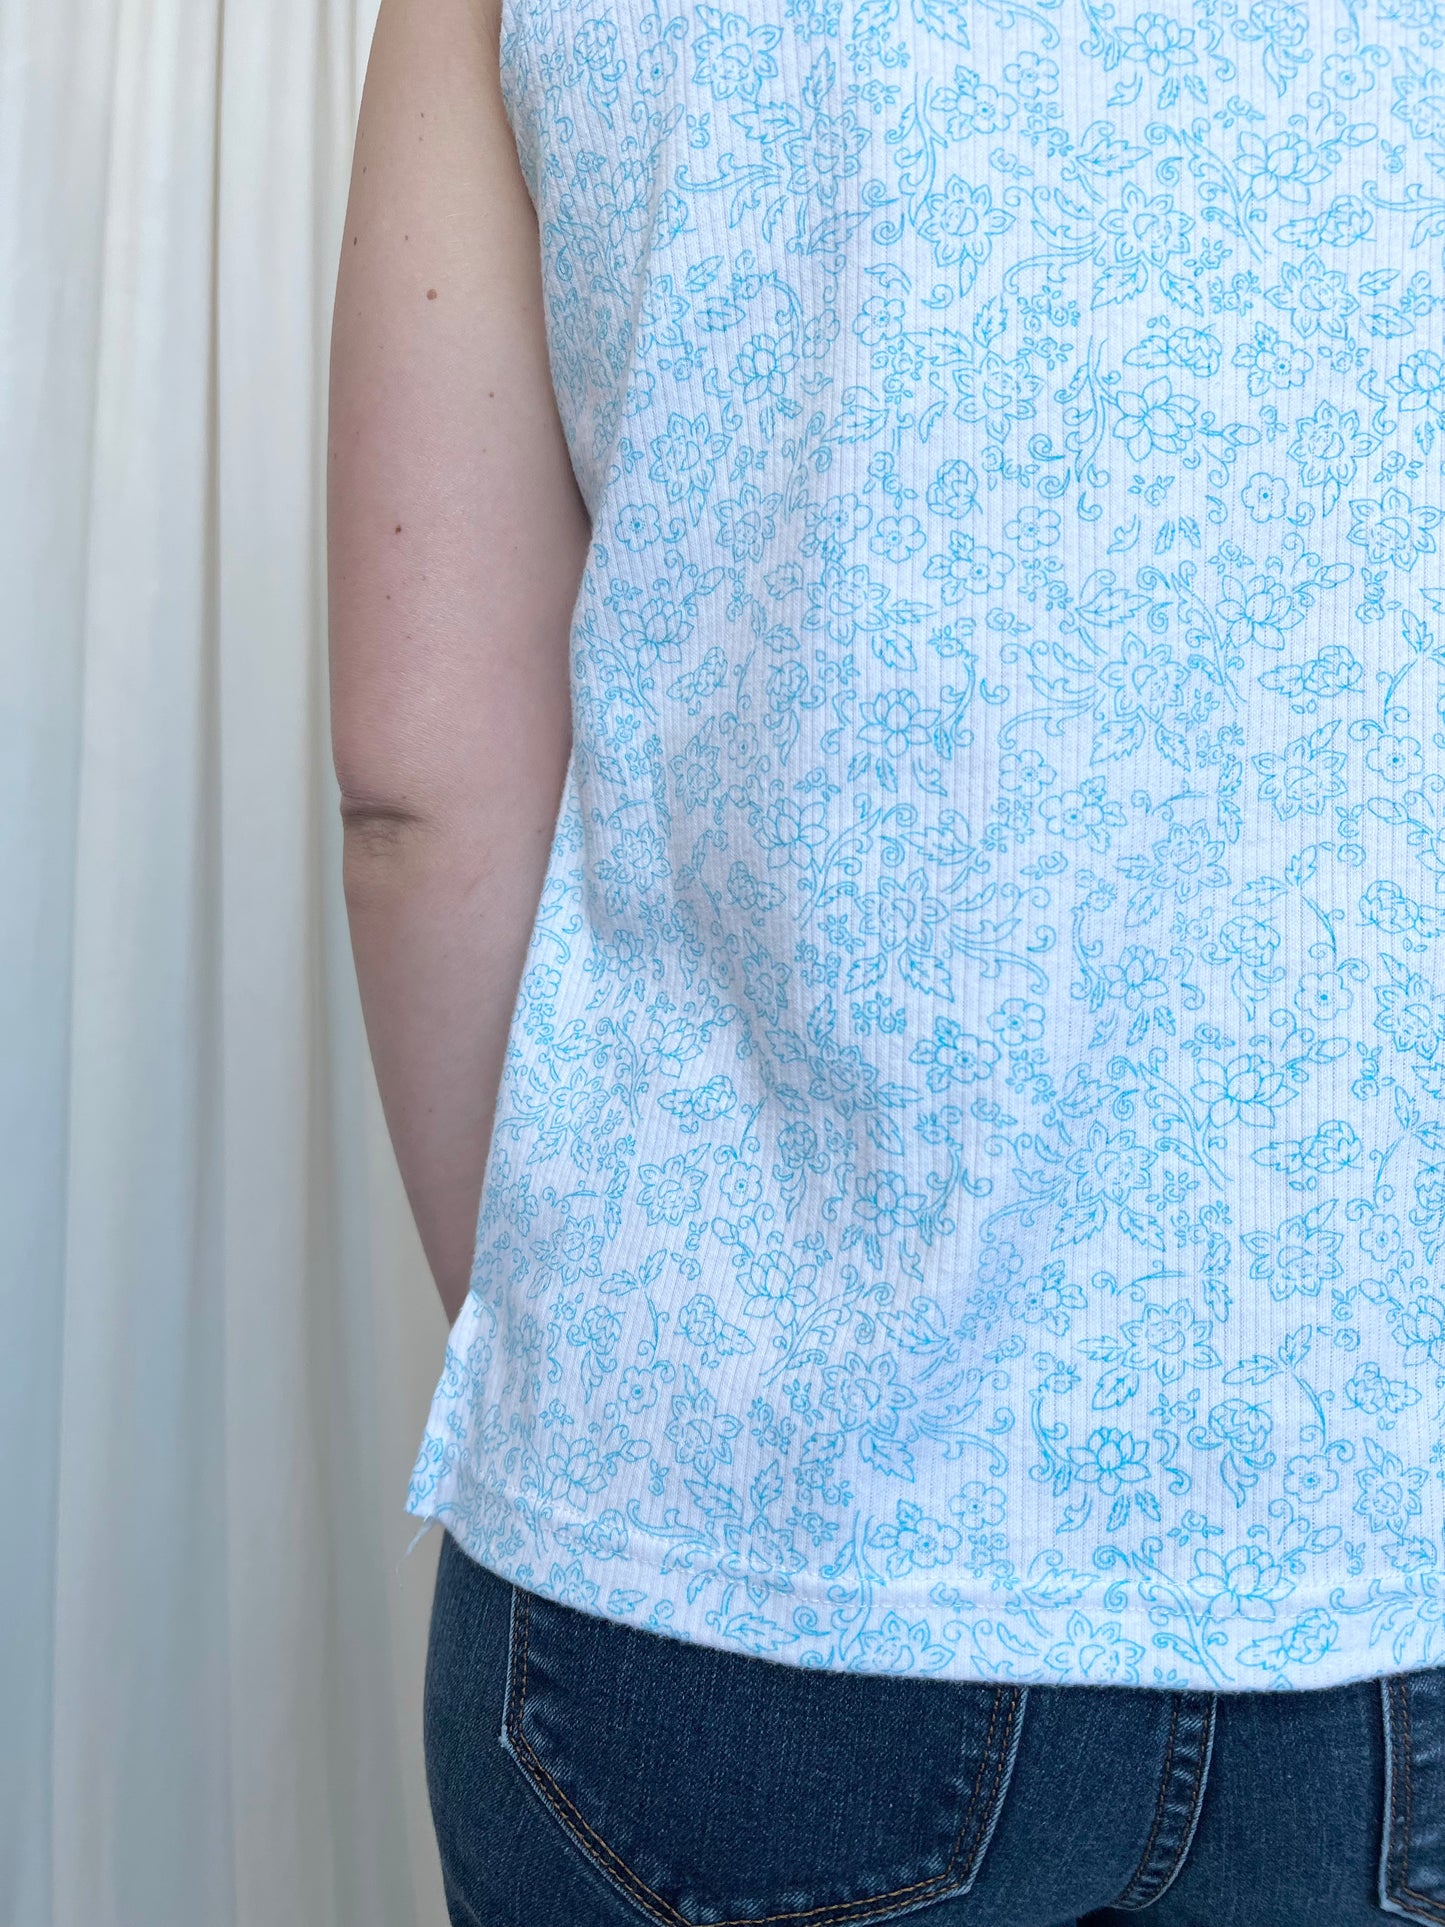 White and Blue Floral Tank - Medium